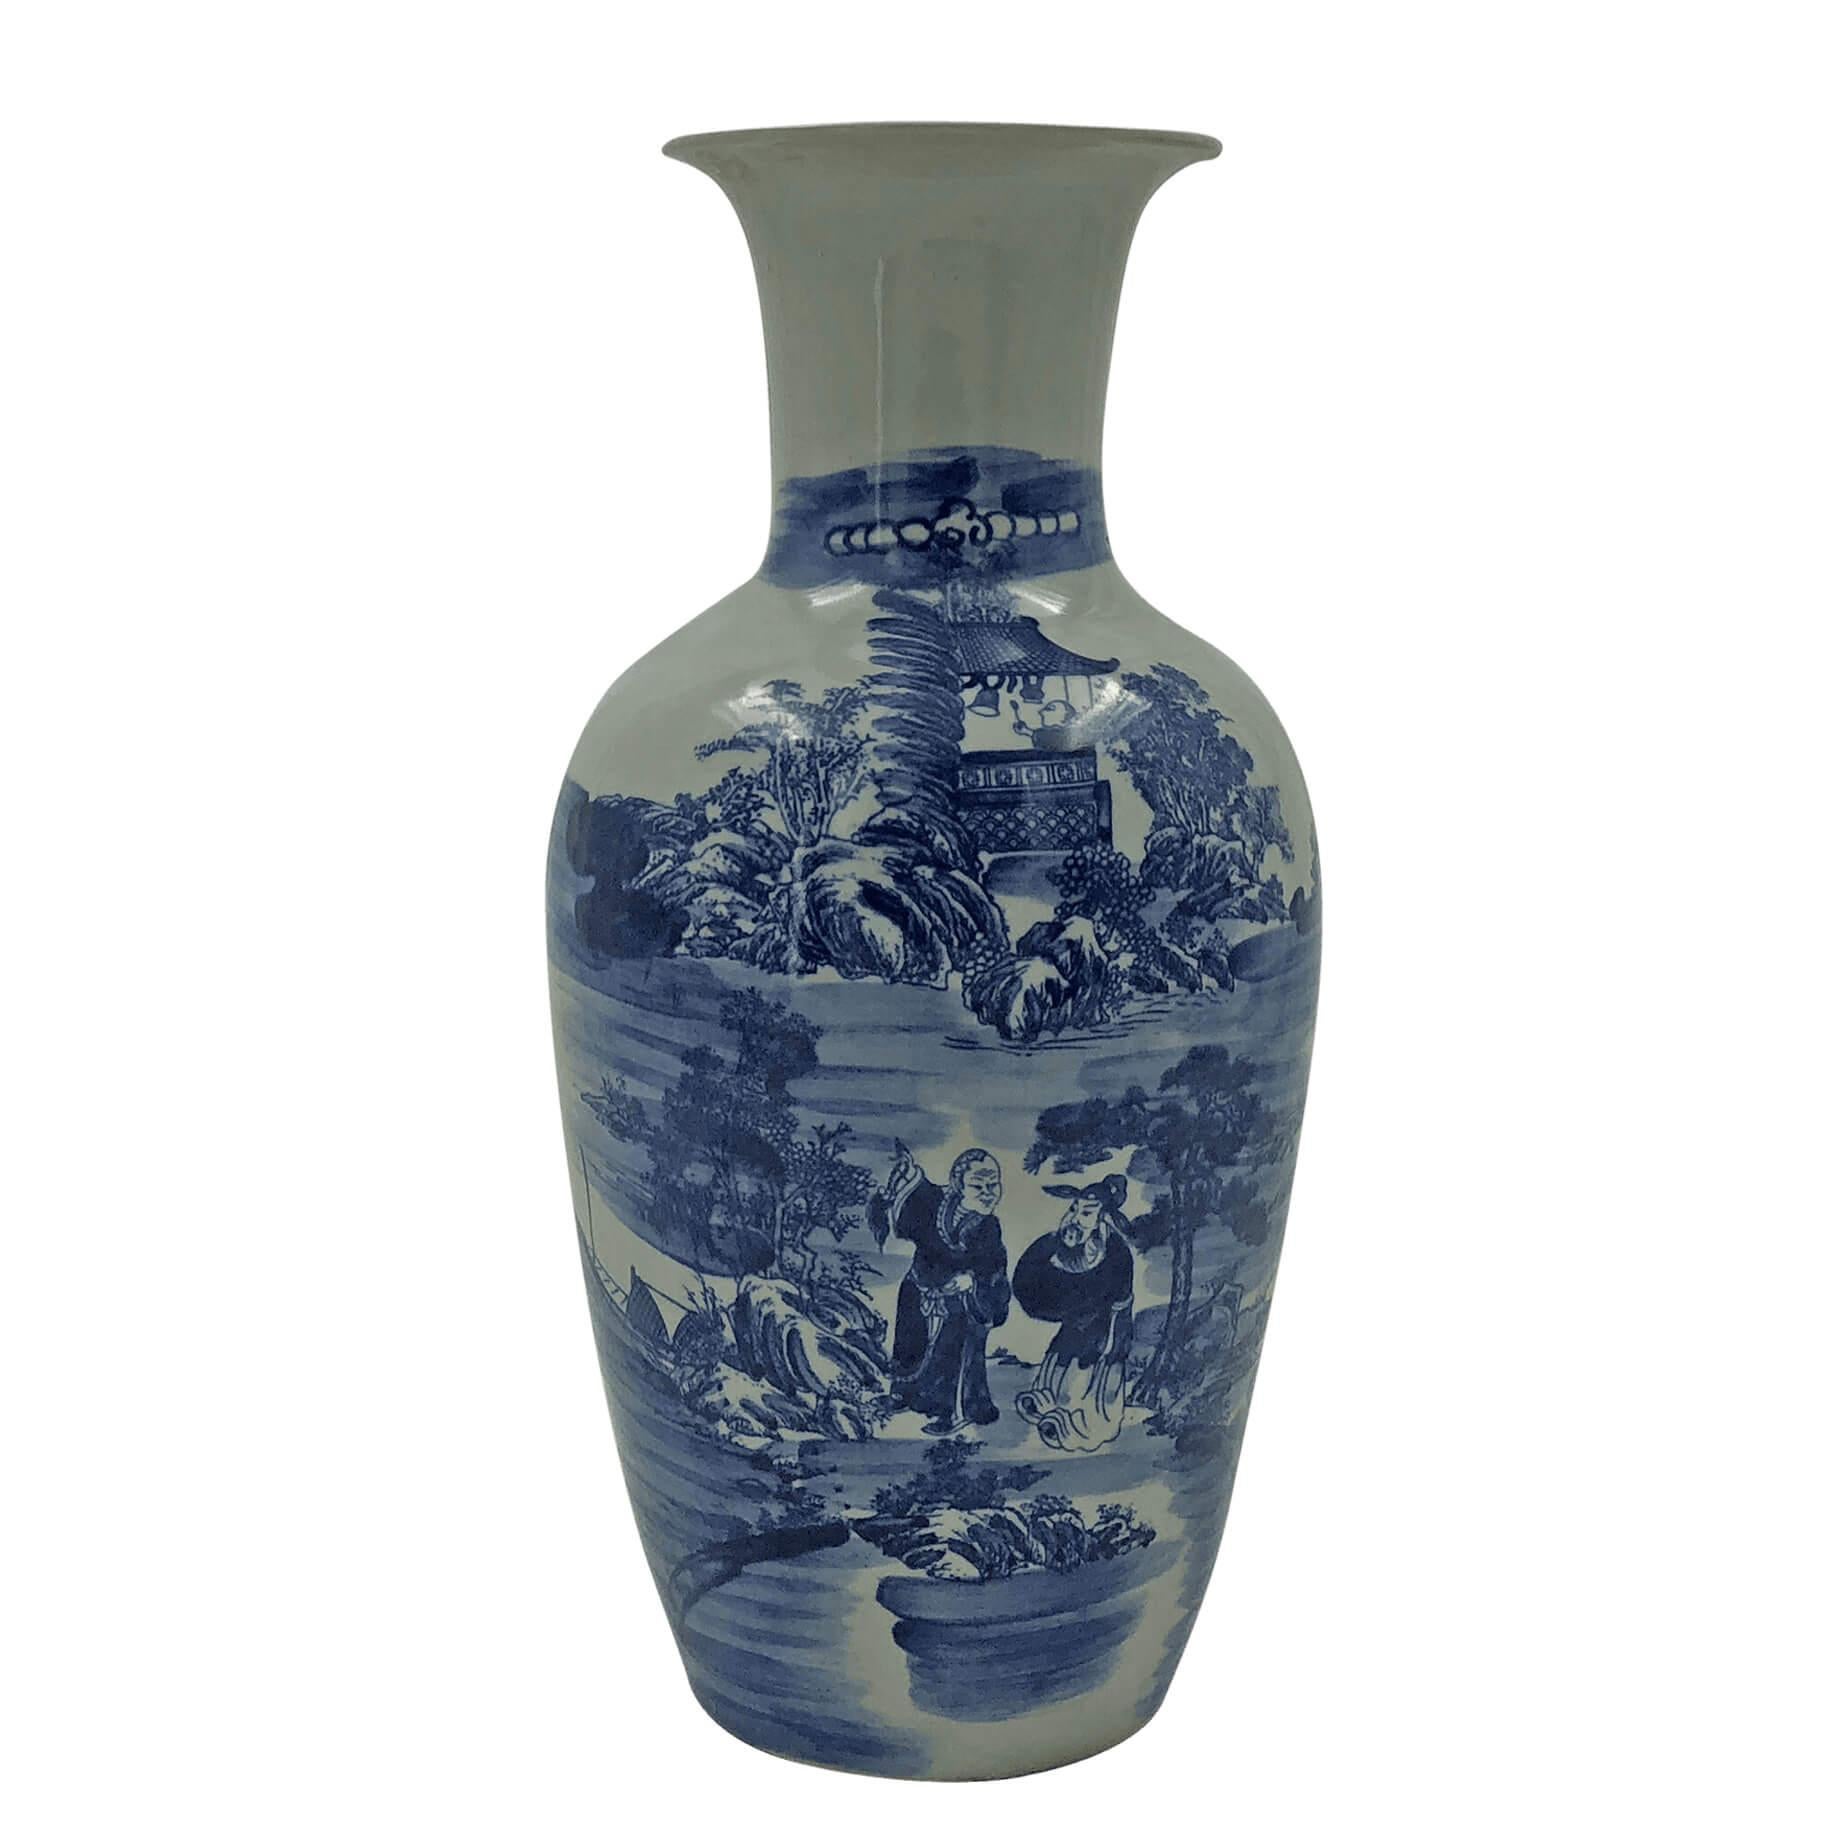 Chinese export blue and white ovoid shape flared vase, decorated with riverside scenes, a hilltop pagoda and elders talking by the water.

Dimensions: 15.75